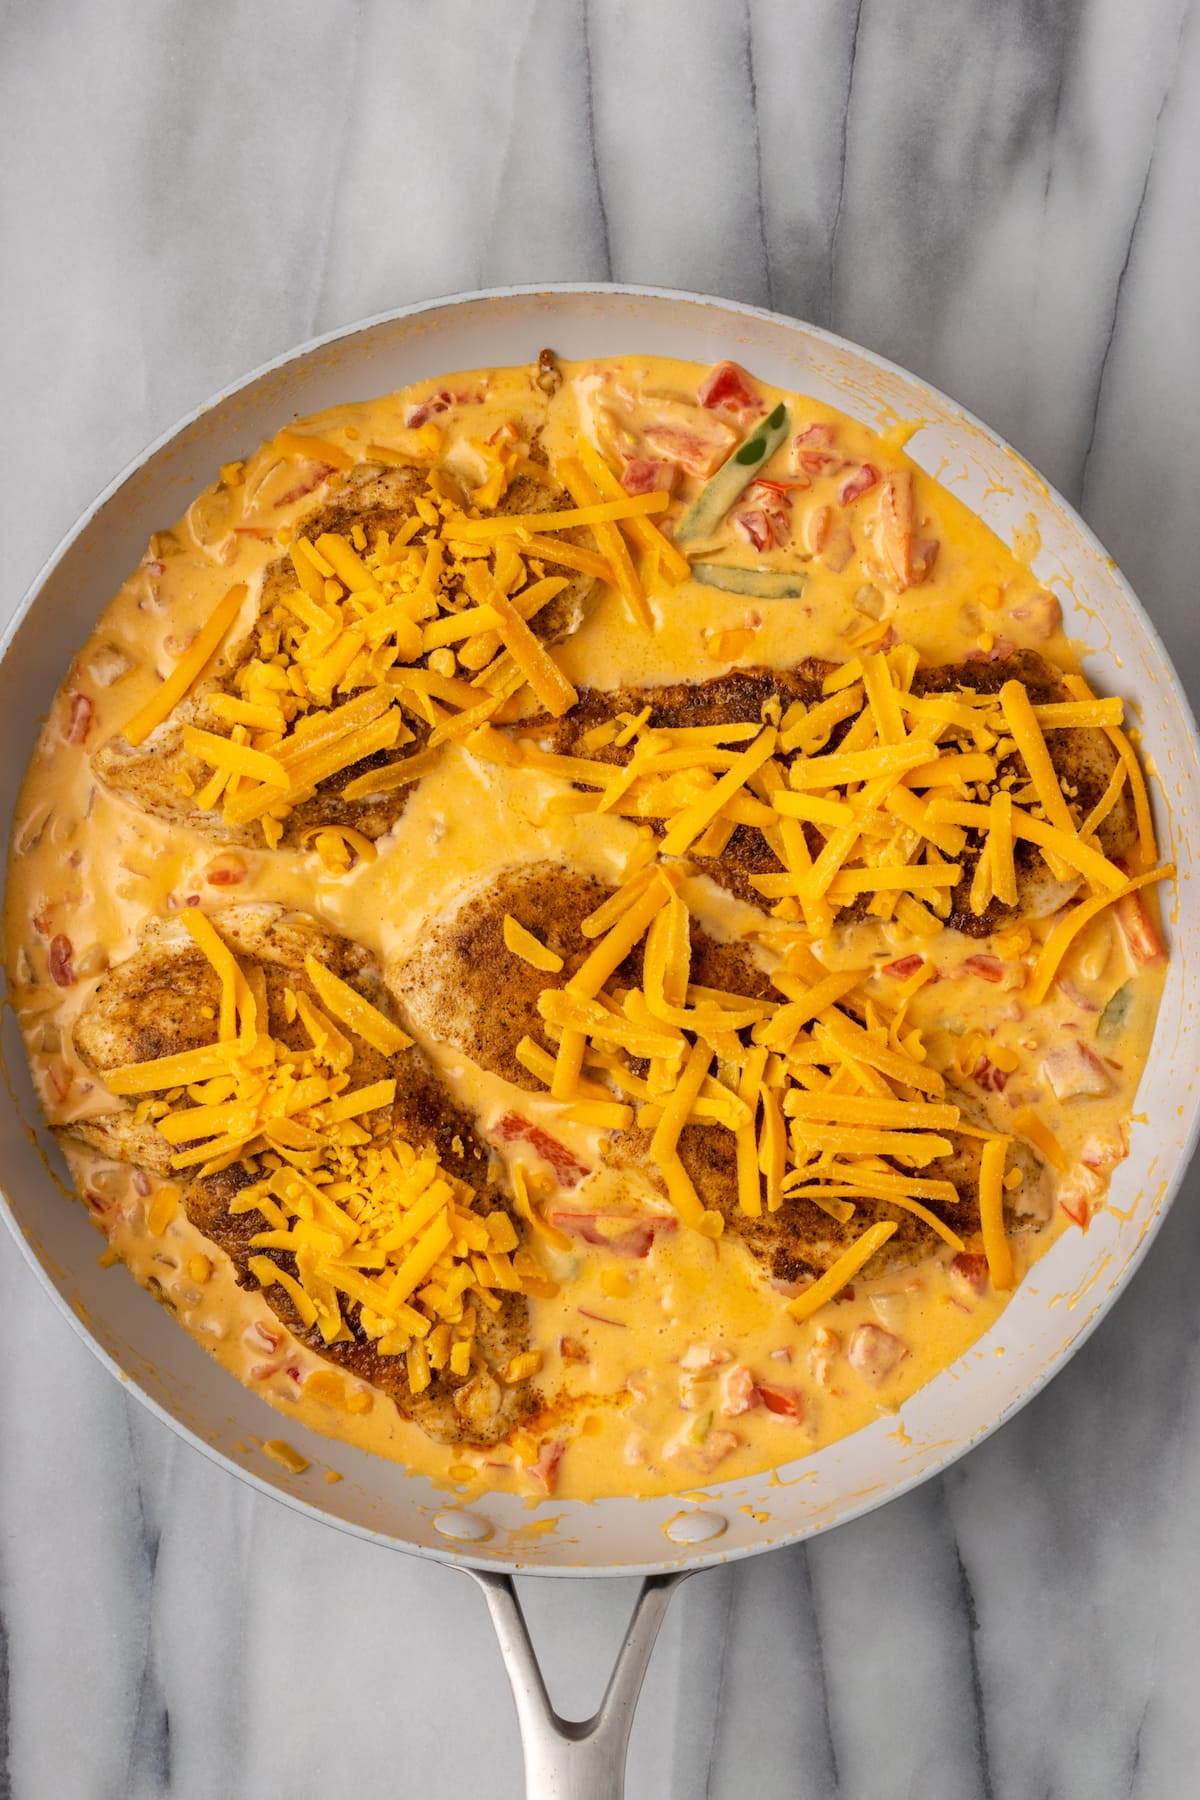 Overhead view of unmelted, shredded cheese on top of chicken breasts in a skillet